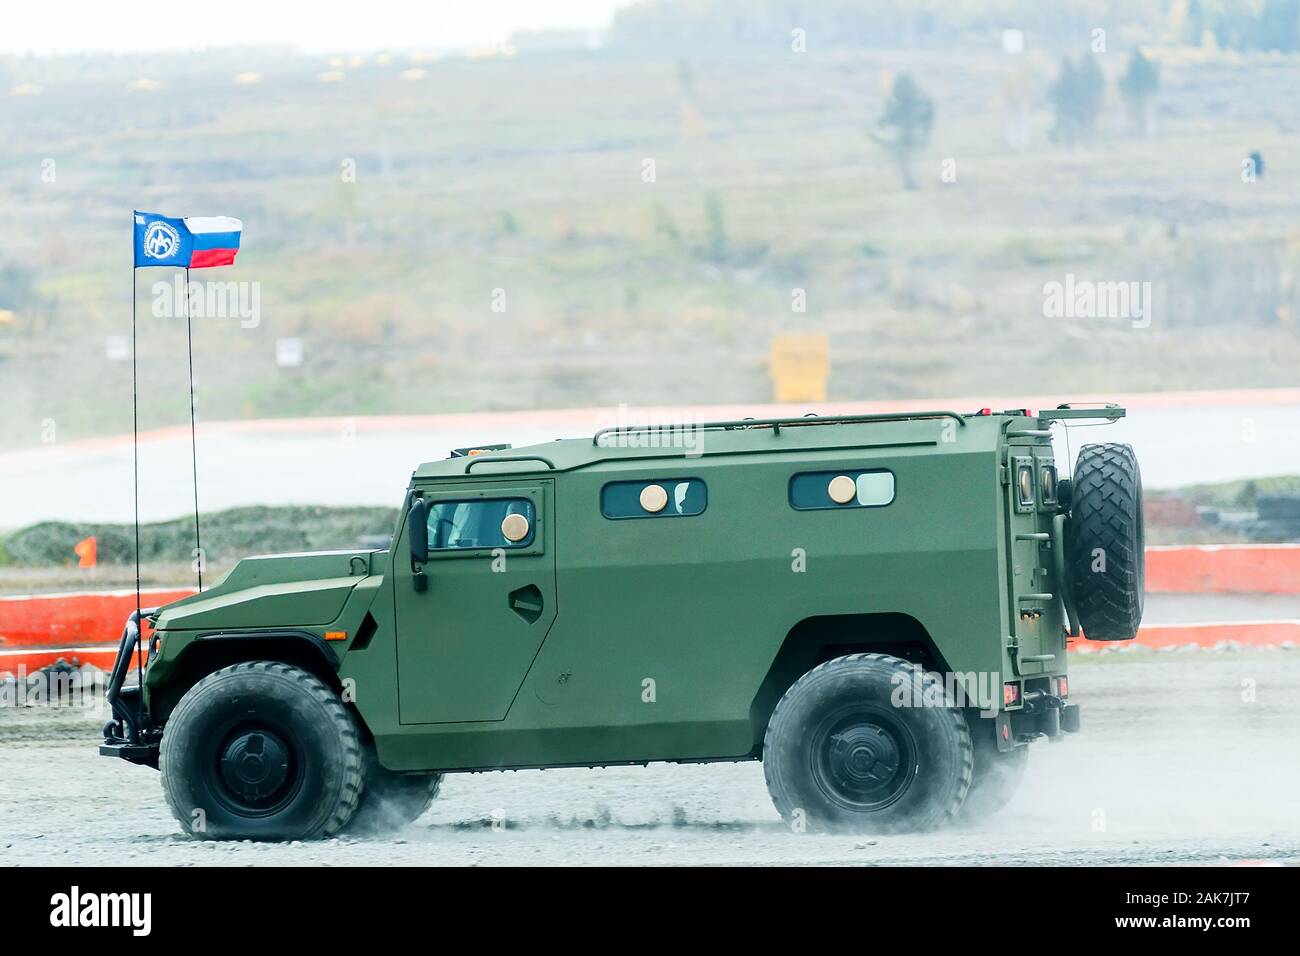 VIPS-233115 Tiger-M armored vehicle. Russia Stock Photo